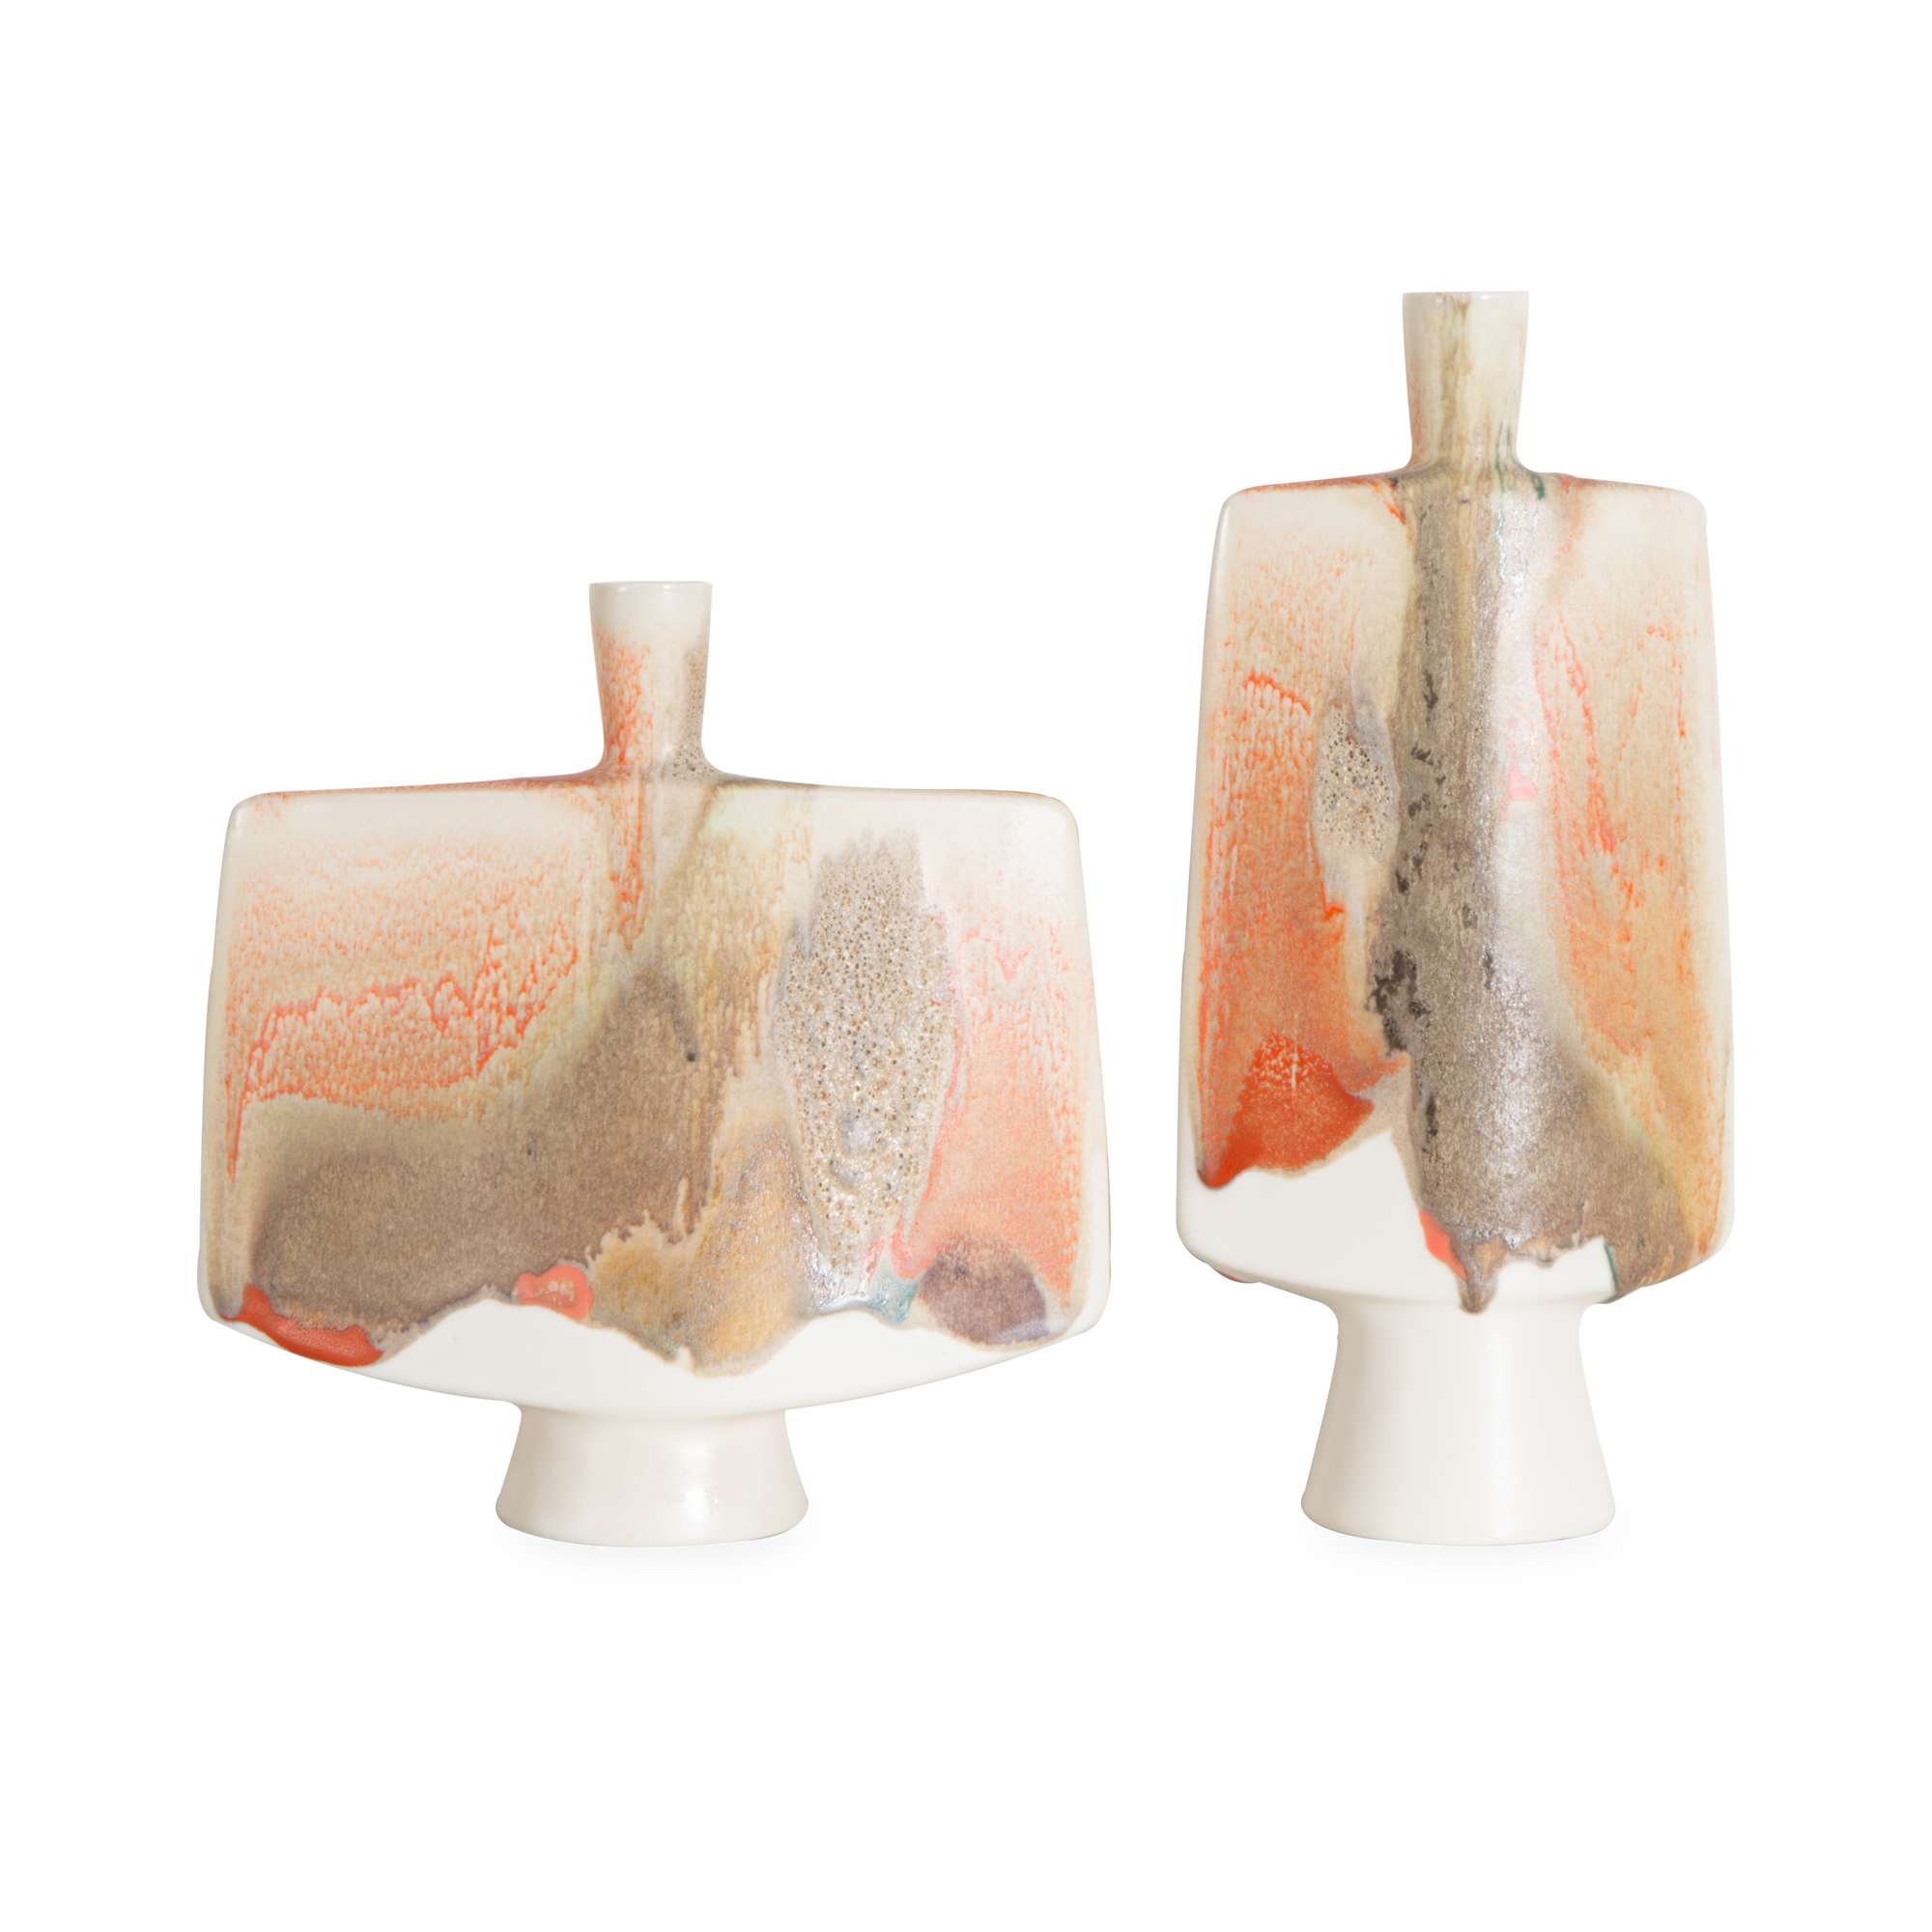 This one-of-a-kind, handpainted set of candle holders by KleinReid combines organic colour patterns and a soft, rounded silhouette to provide a captivating addition to your tablesc